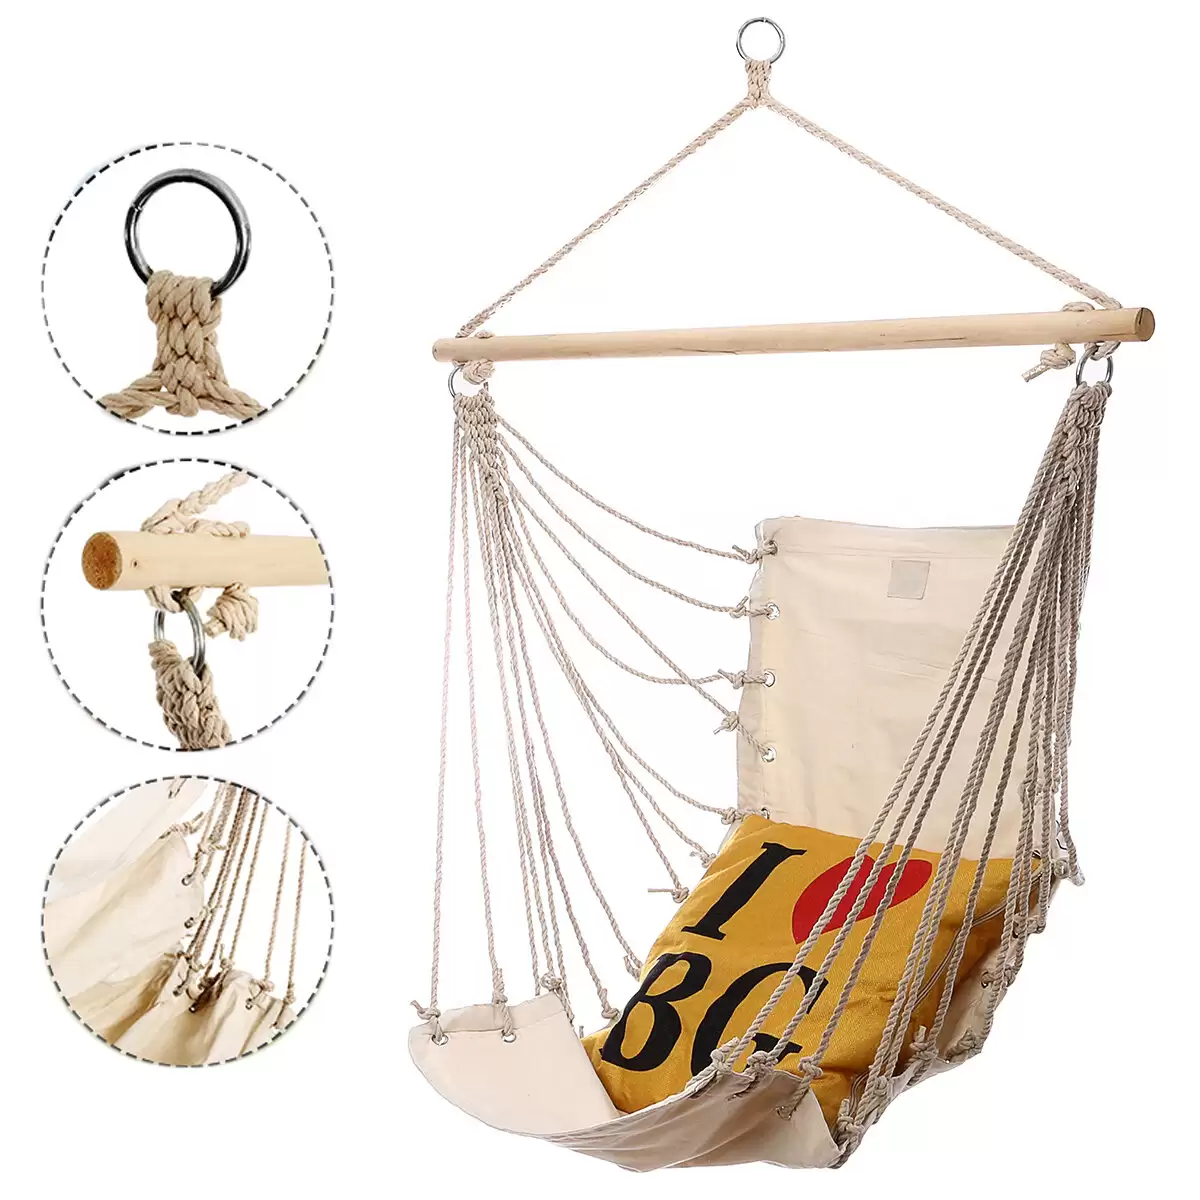 Order In Just $14.99 42% Off For 17x32inch Outdoor Hammock Chair Hanging Chairs With This Coupon At Banggood